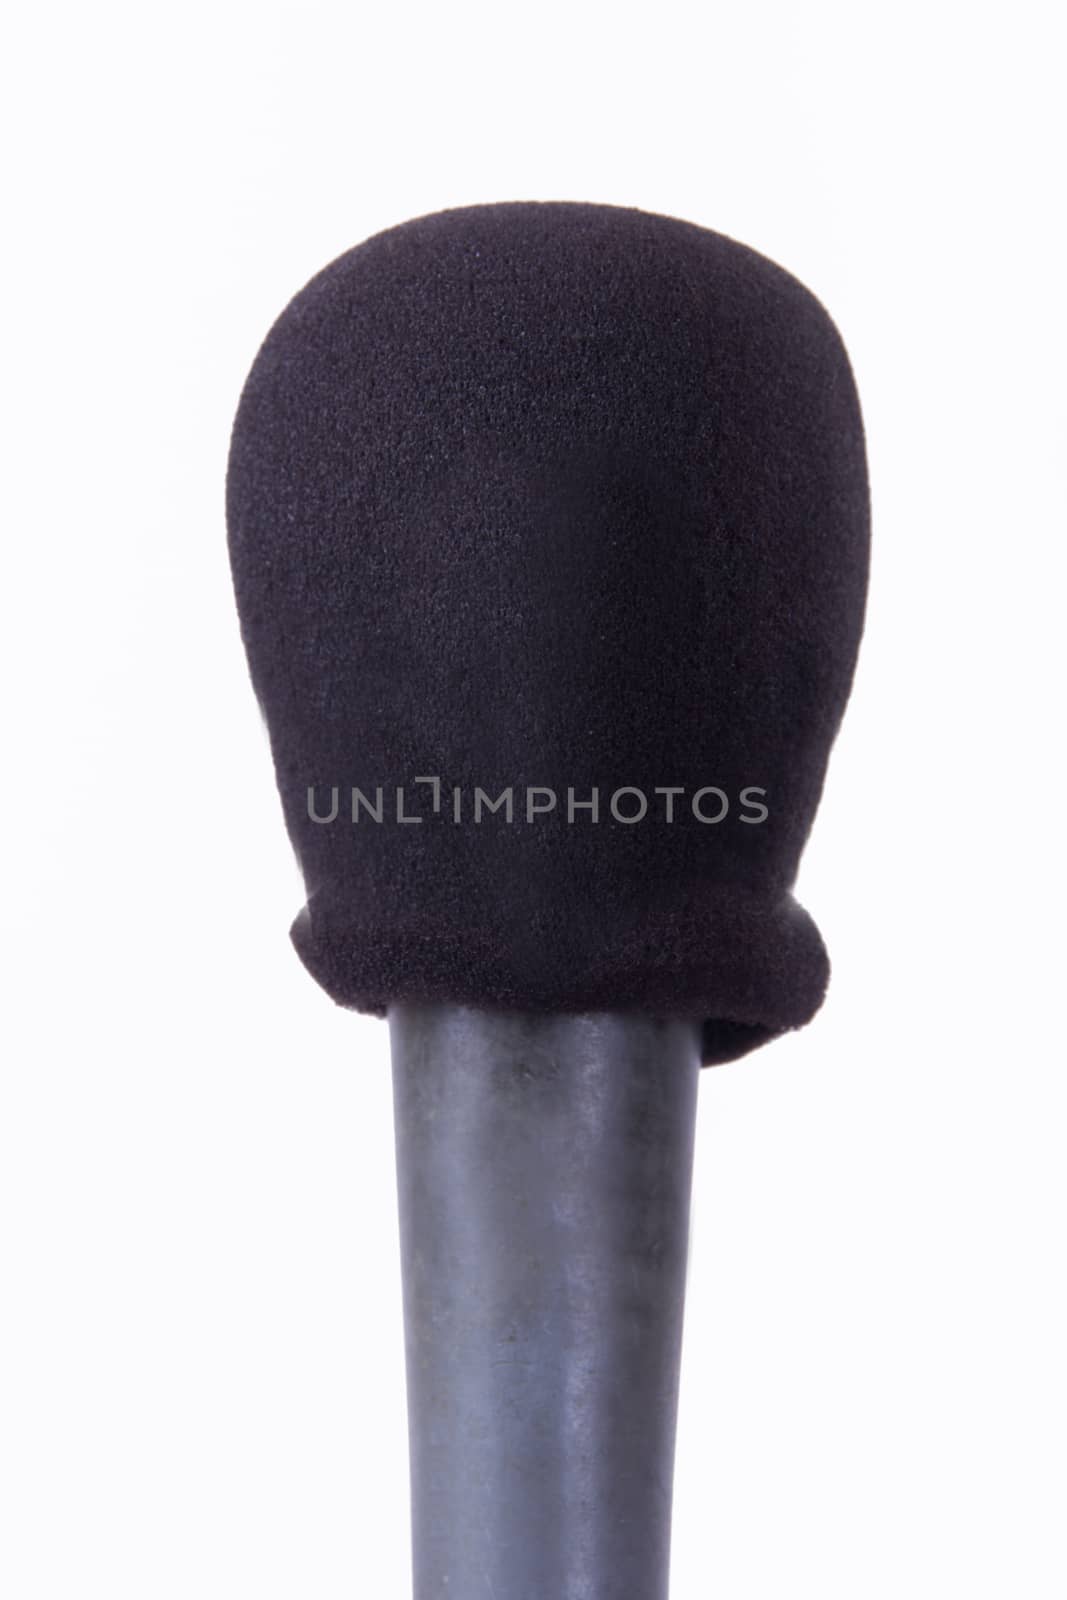 Black and dirty microphone, isolated on white background.